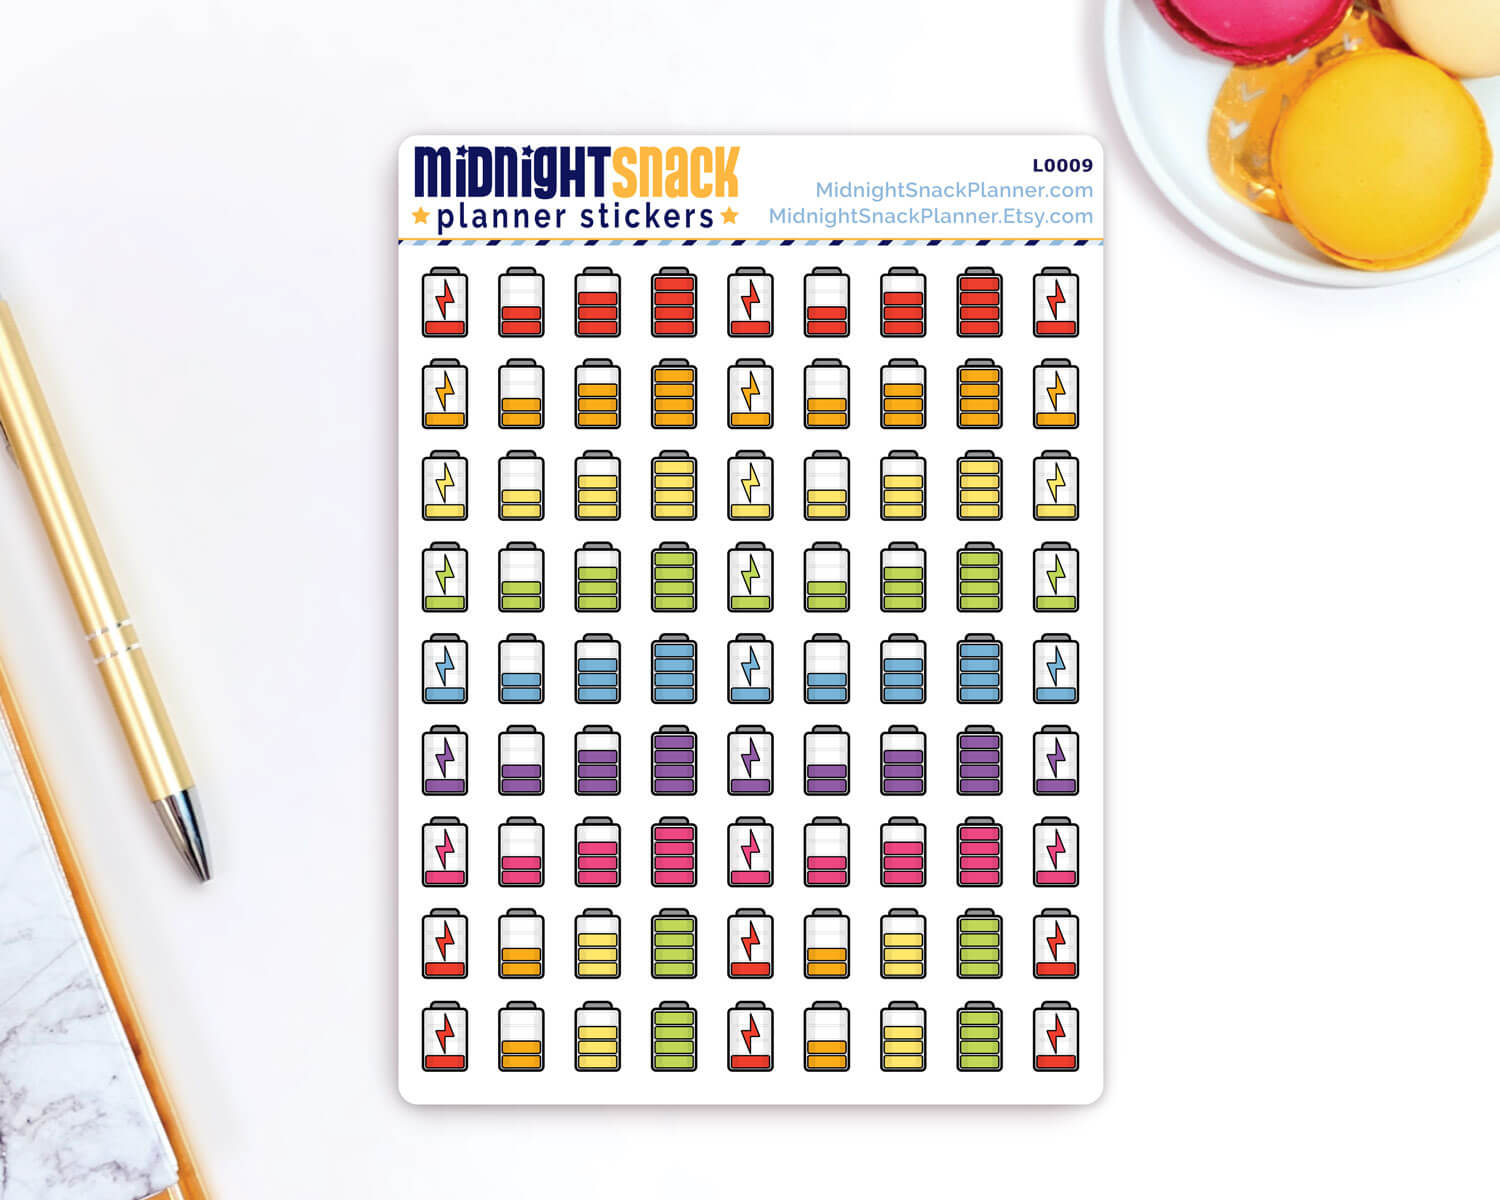 Charge Battery Planner Stickers from Midnight Snack Planner